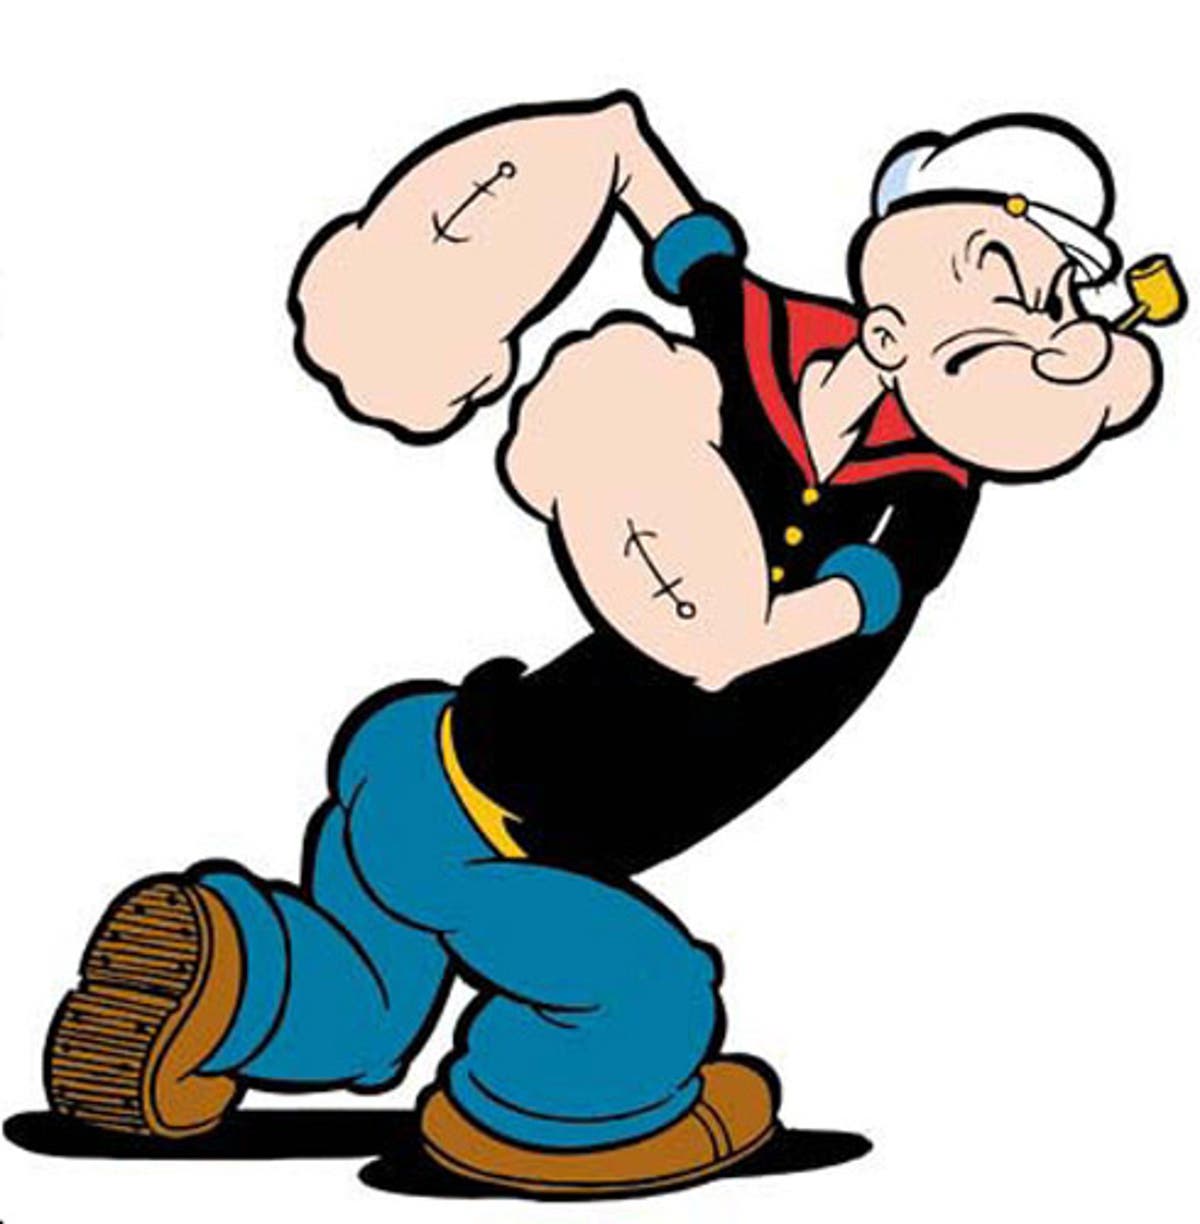 Popeye had it right: spinach really does make you stronger | The ...